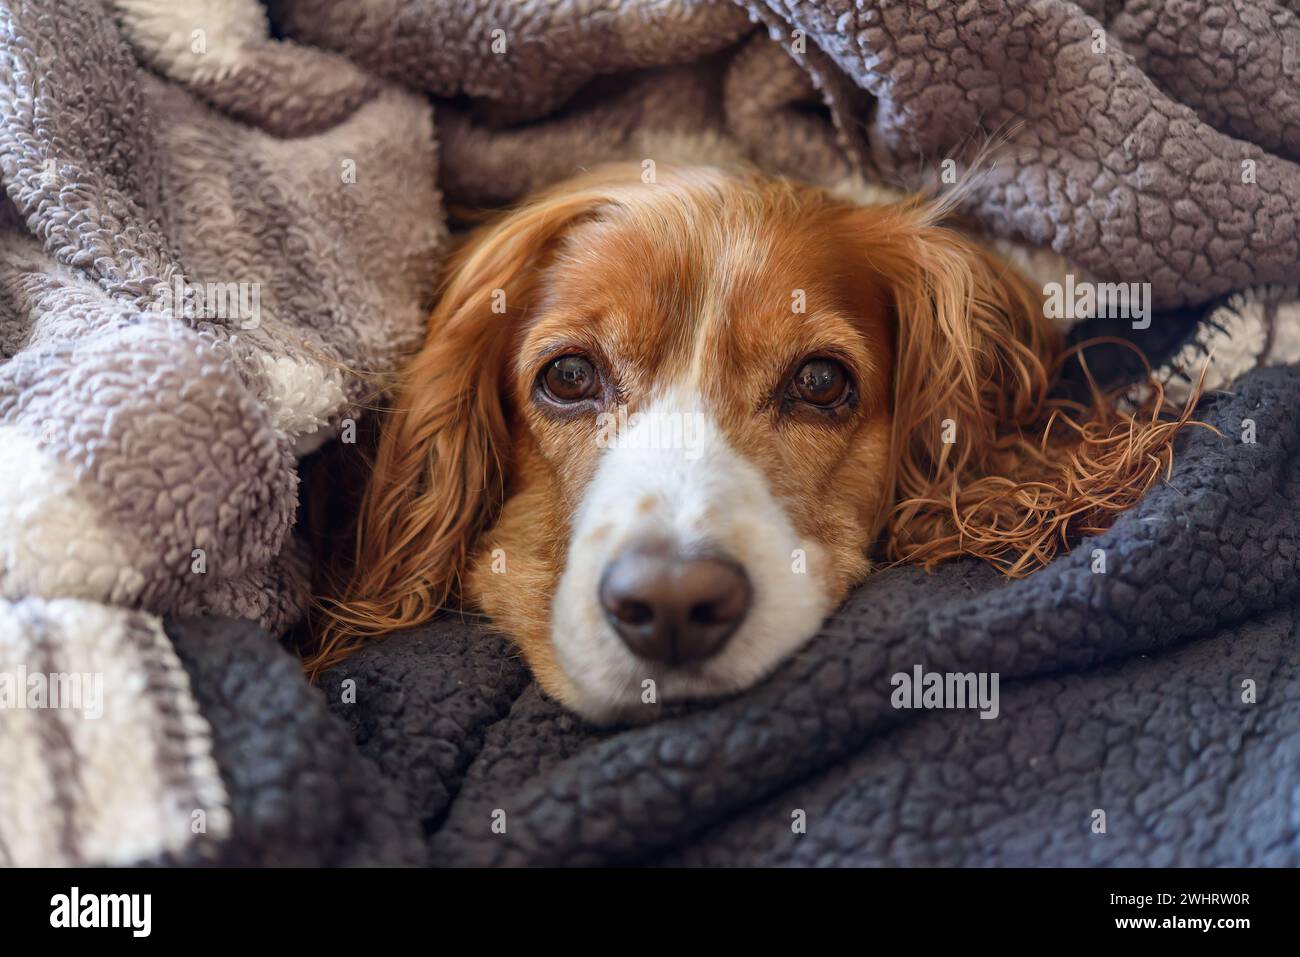 Cute dog pet wrapped in blanket after taking a bath. Stock Photo